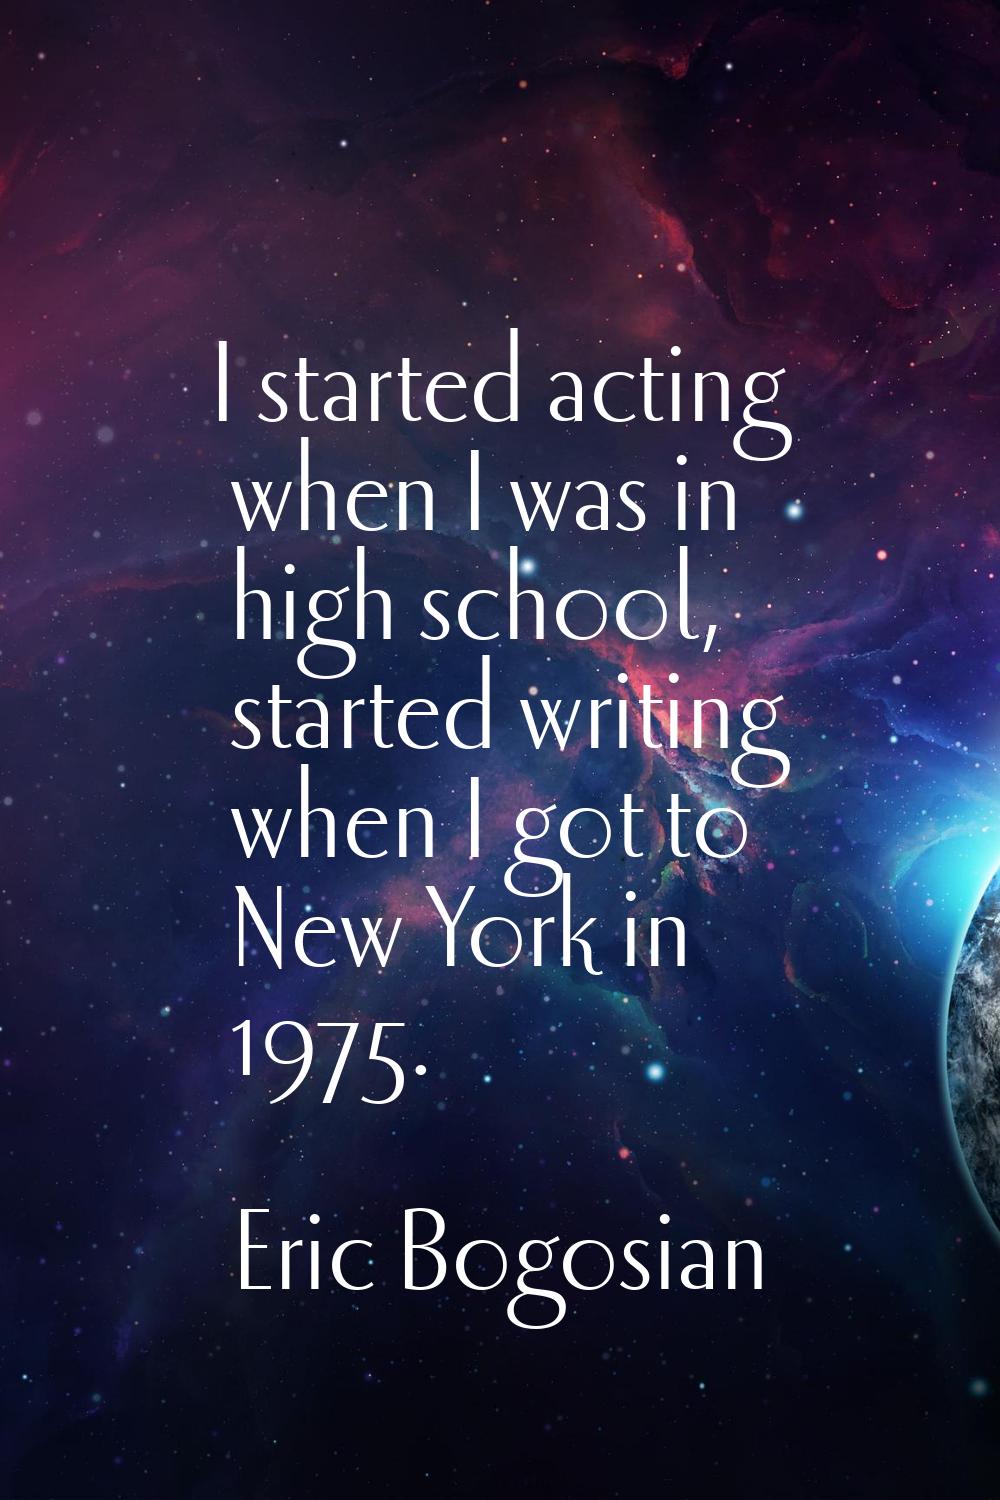 I started acting when I was in high school, started writing when I got to New York in 1975.